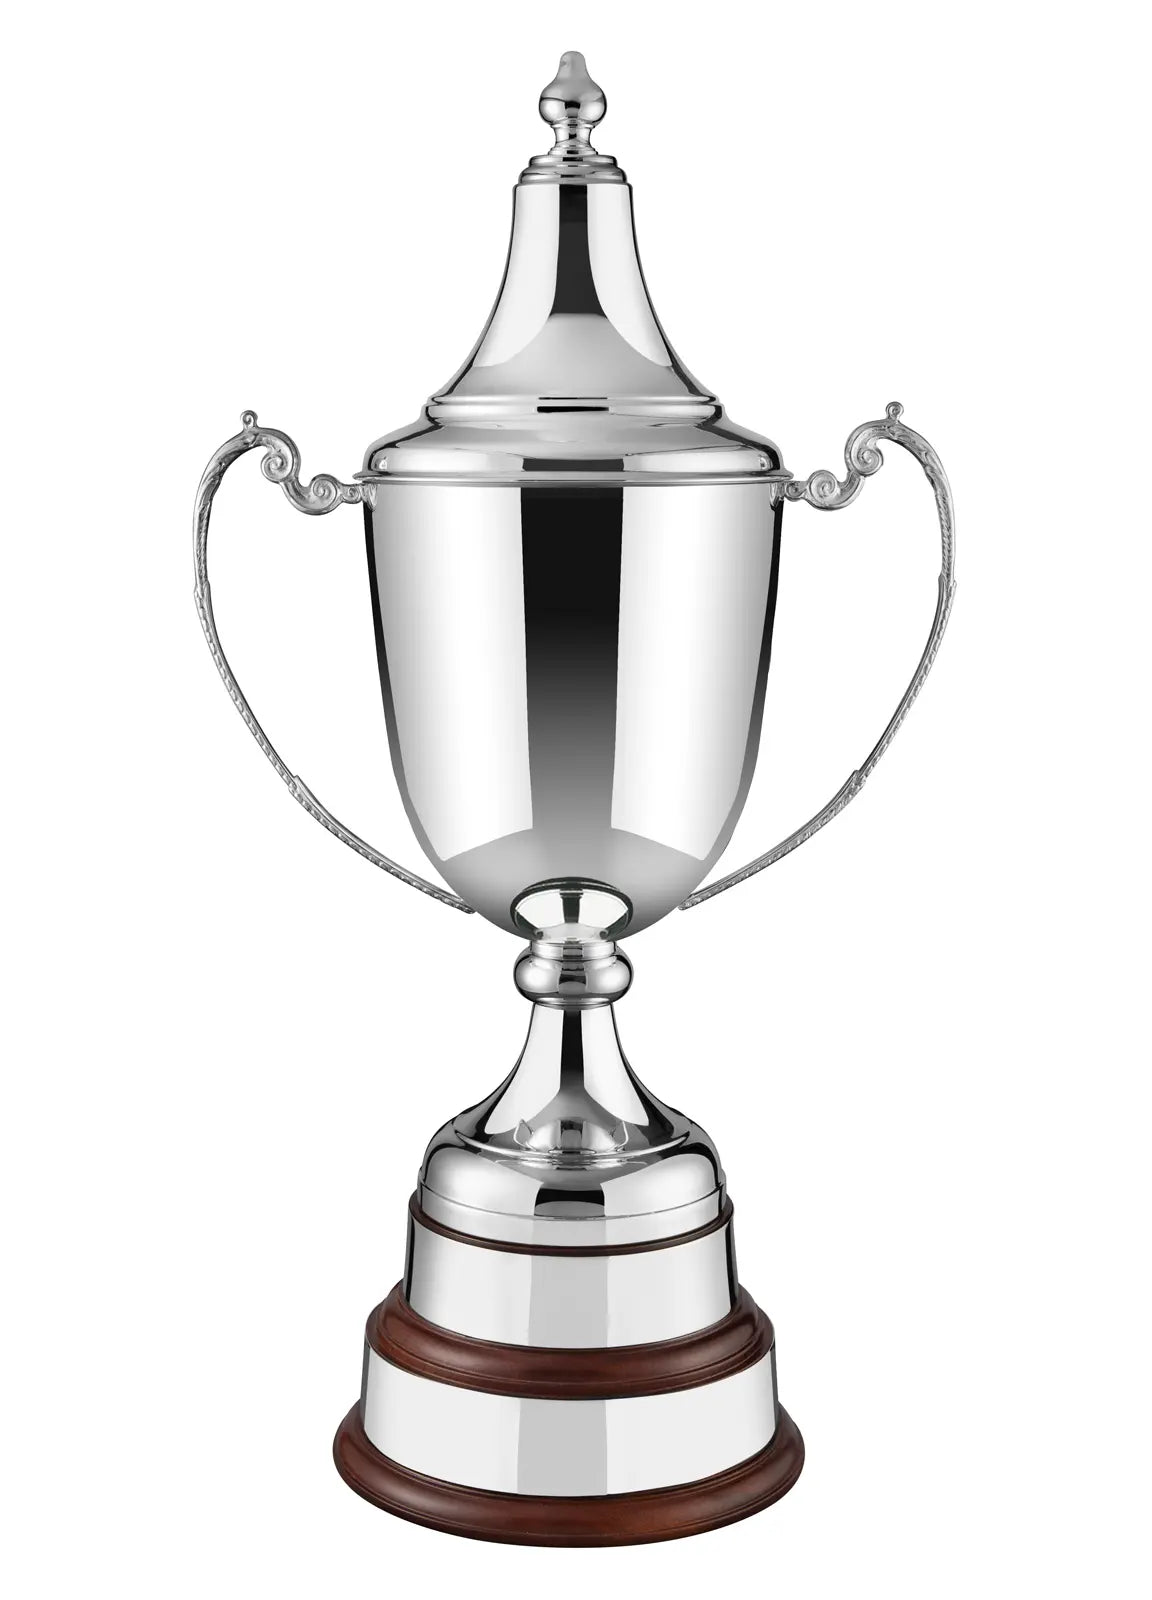 The Grandeur Silver-Plated Trophy Cup (30